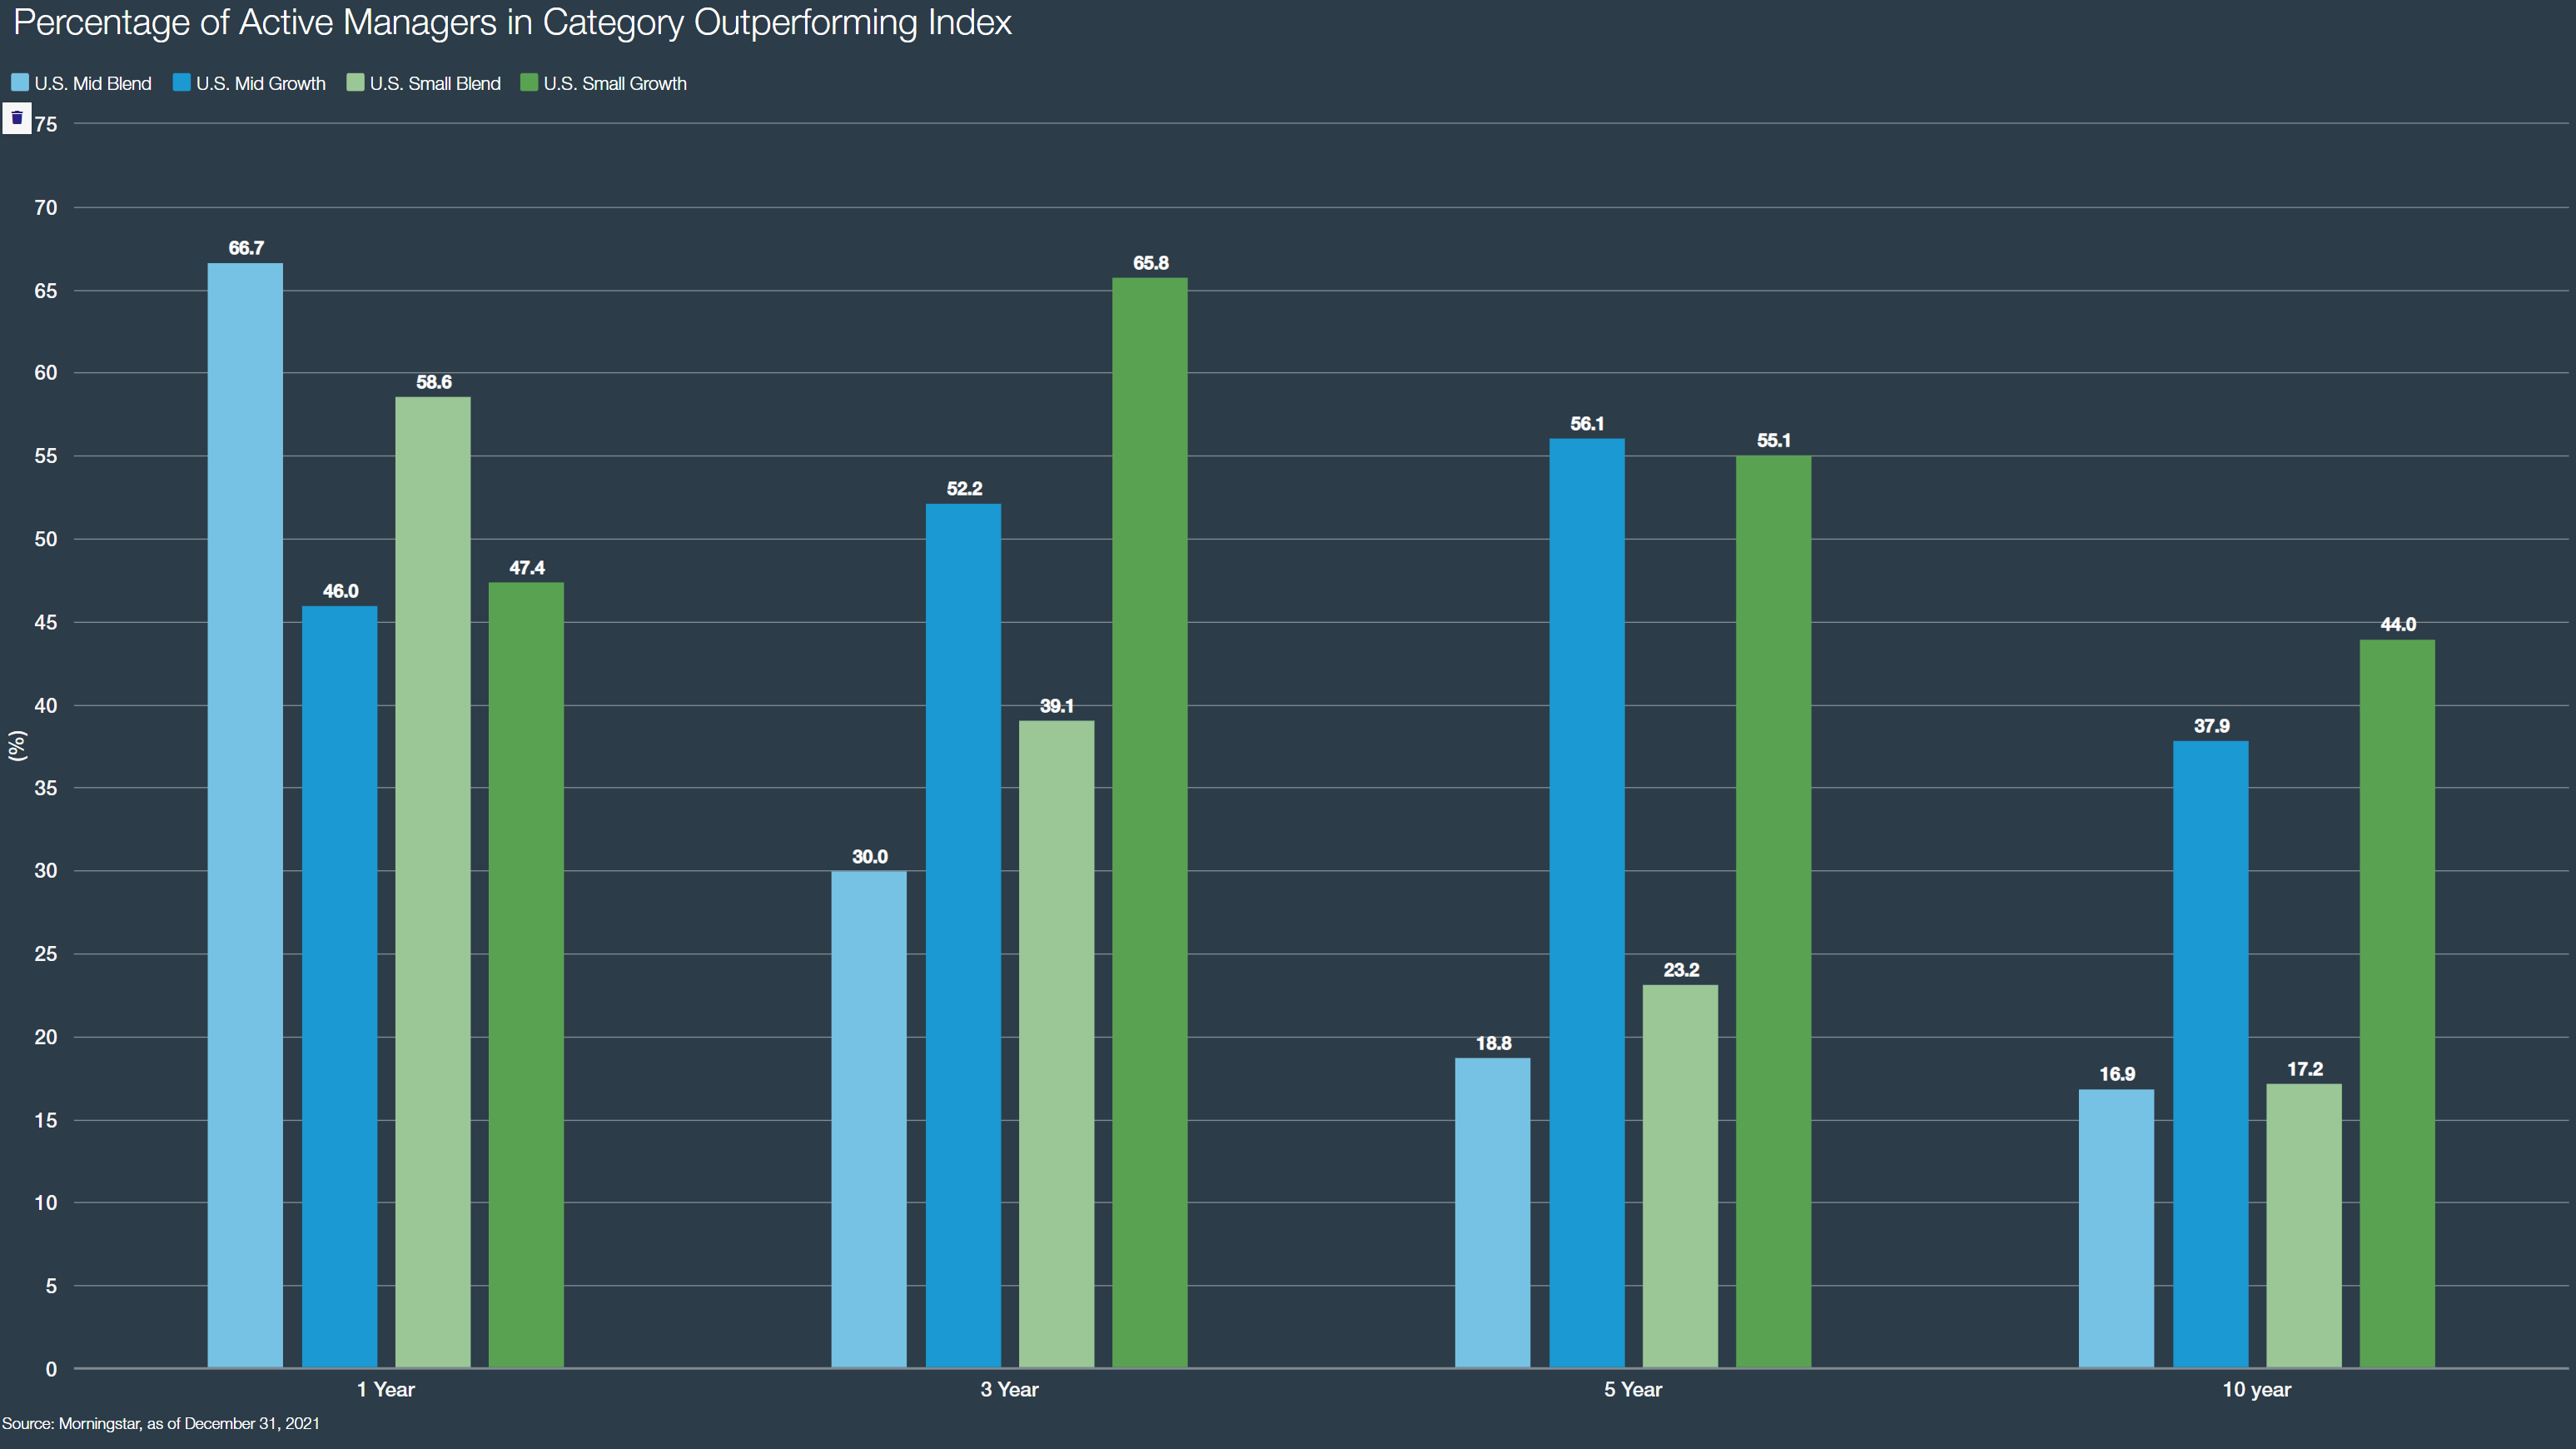 Percentage of Active Managers in Category Outperforming Index - Column chart